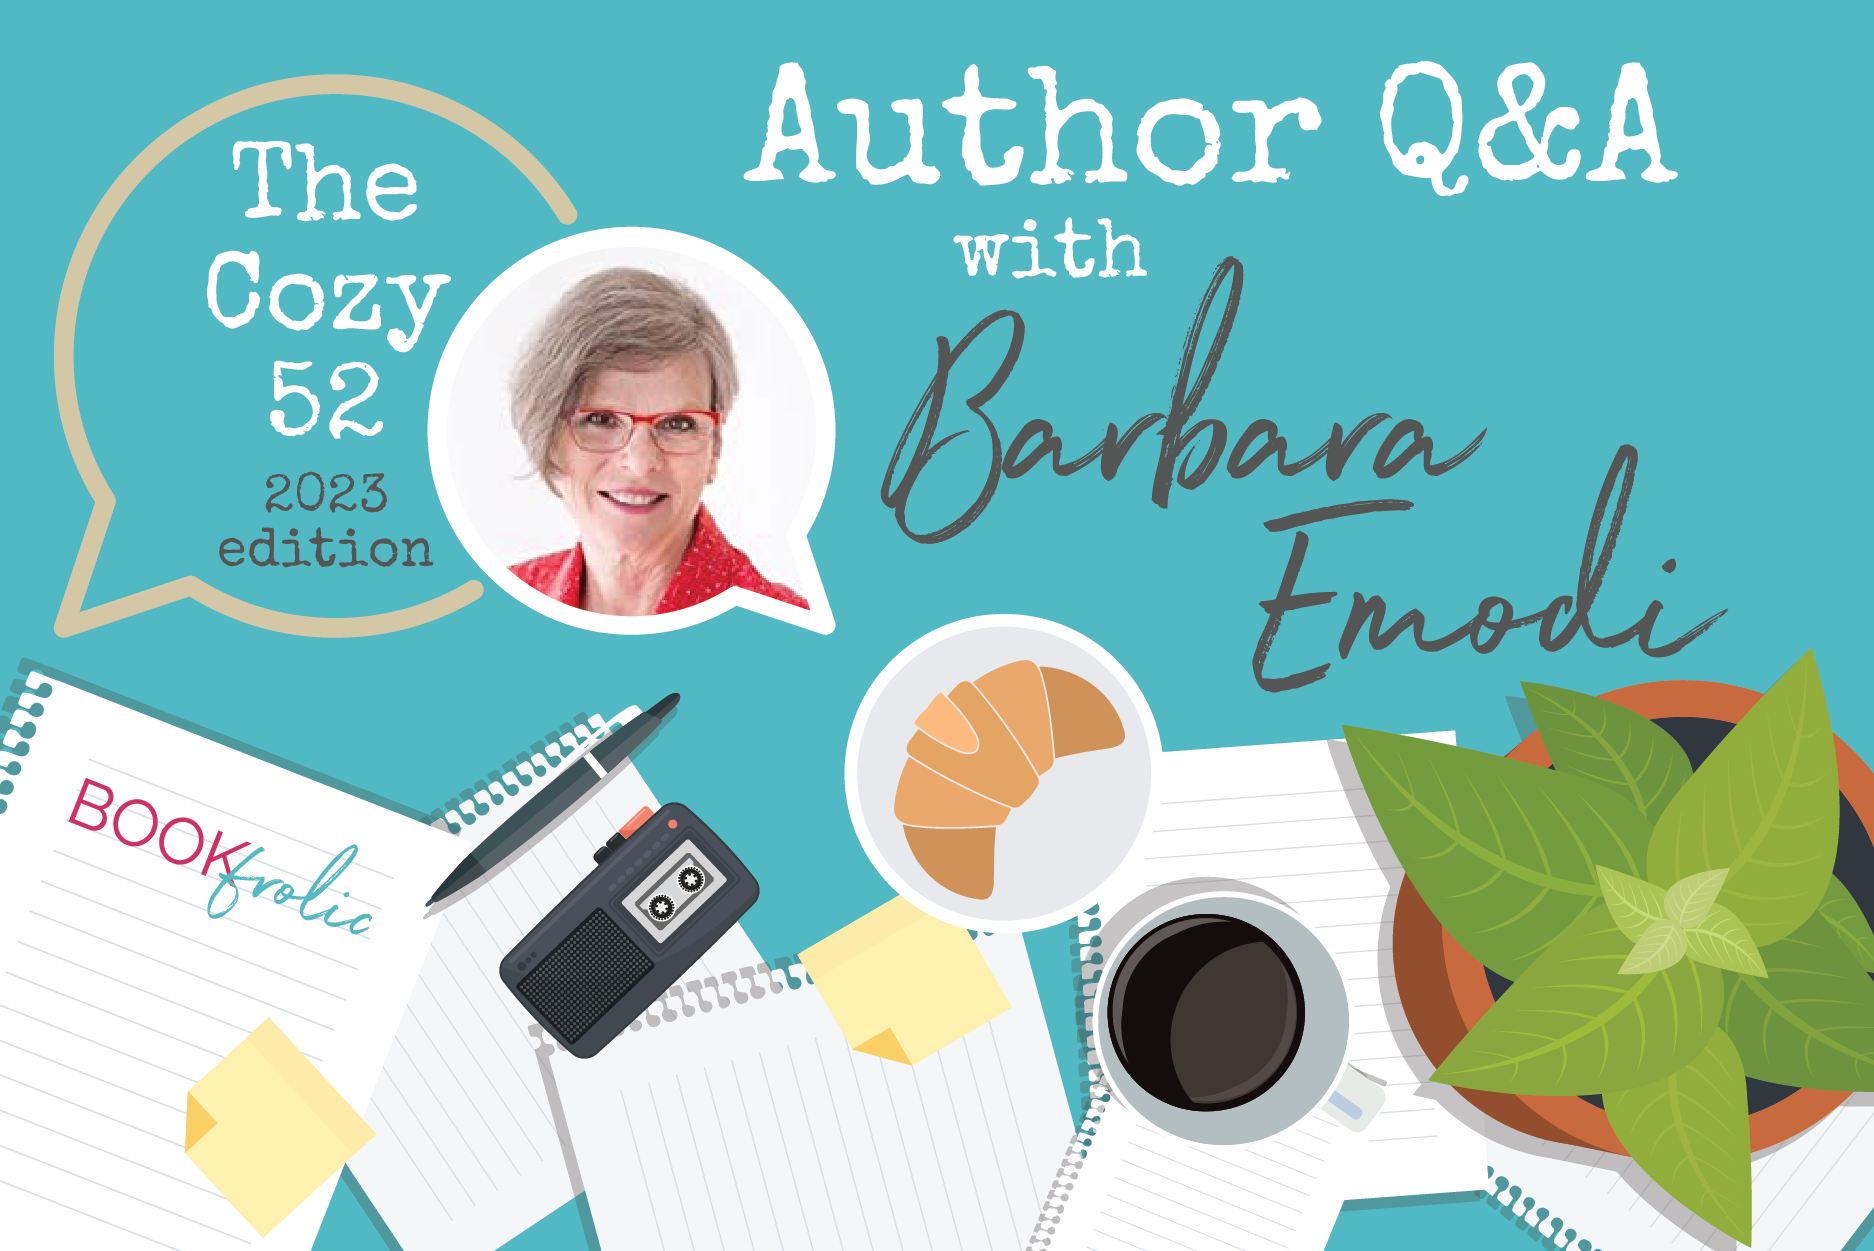 banner for author interview post with Barbara Emodi